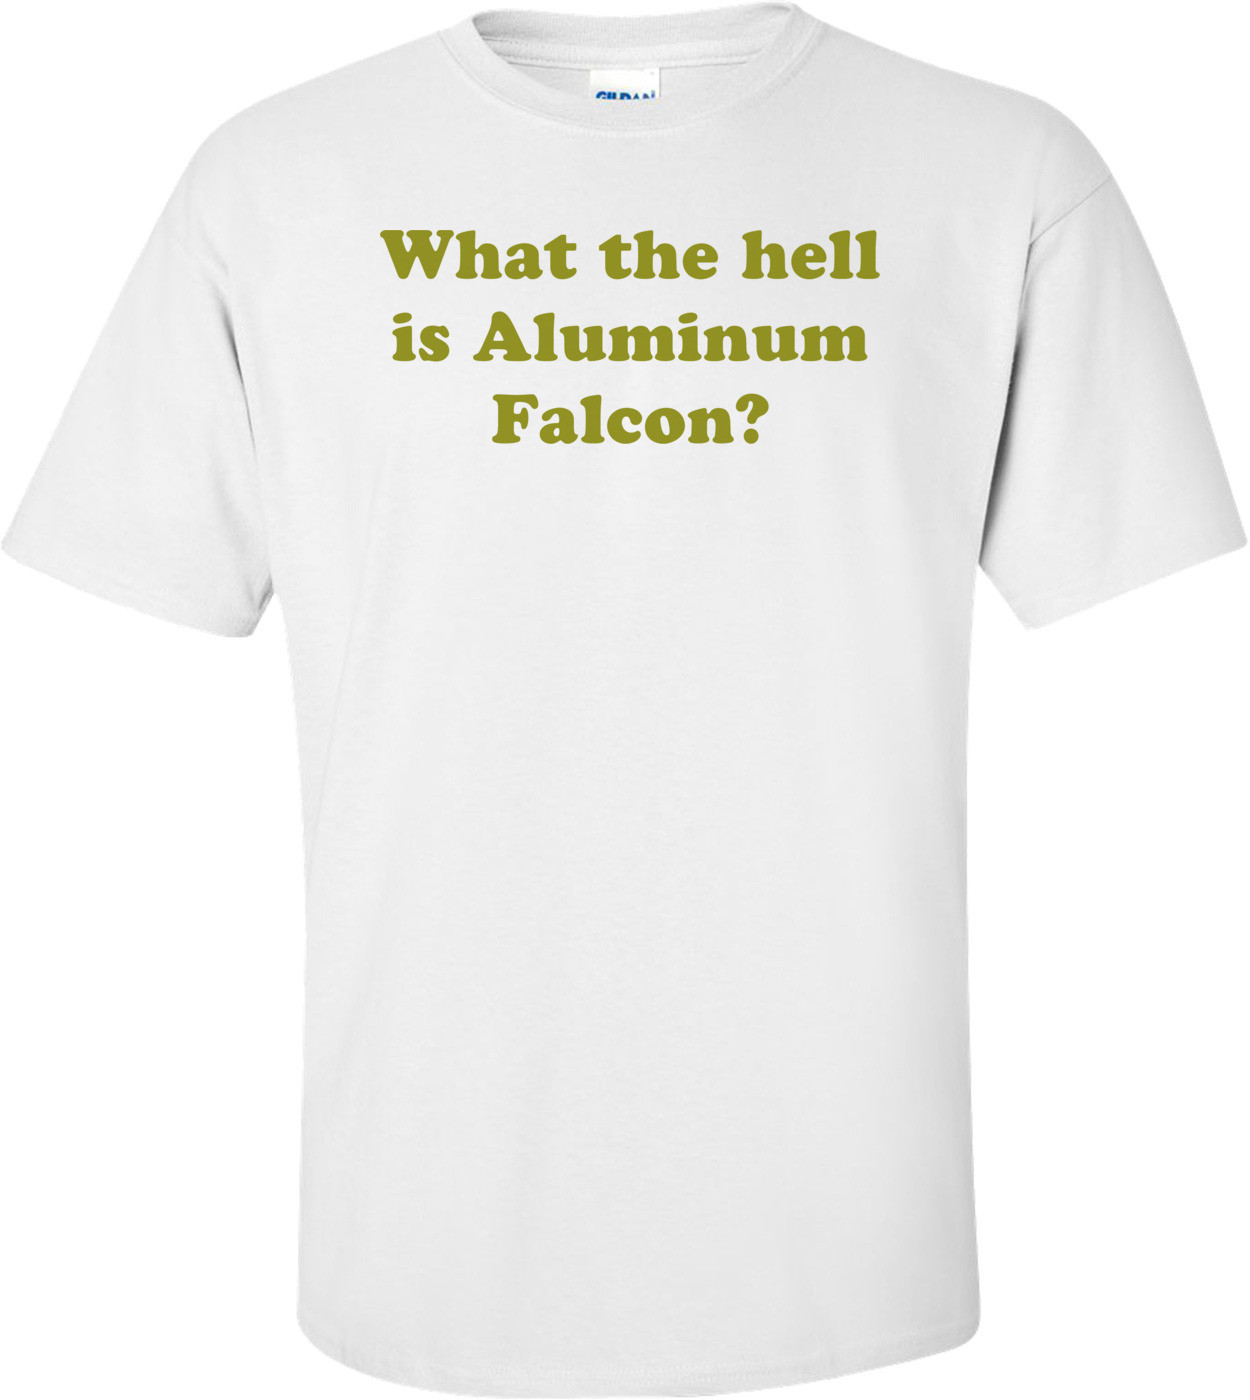 What the hell is Aluminum Falcon?